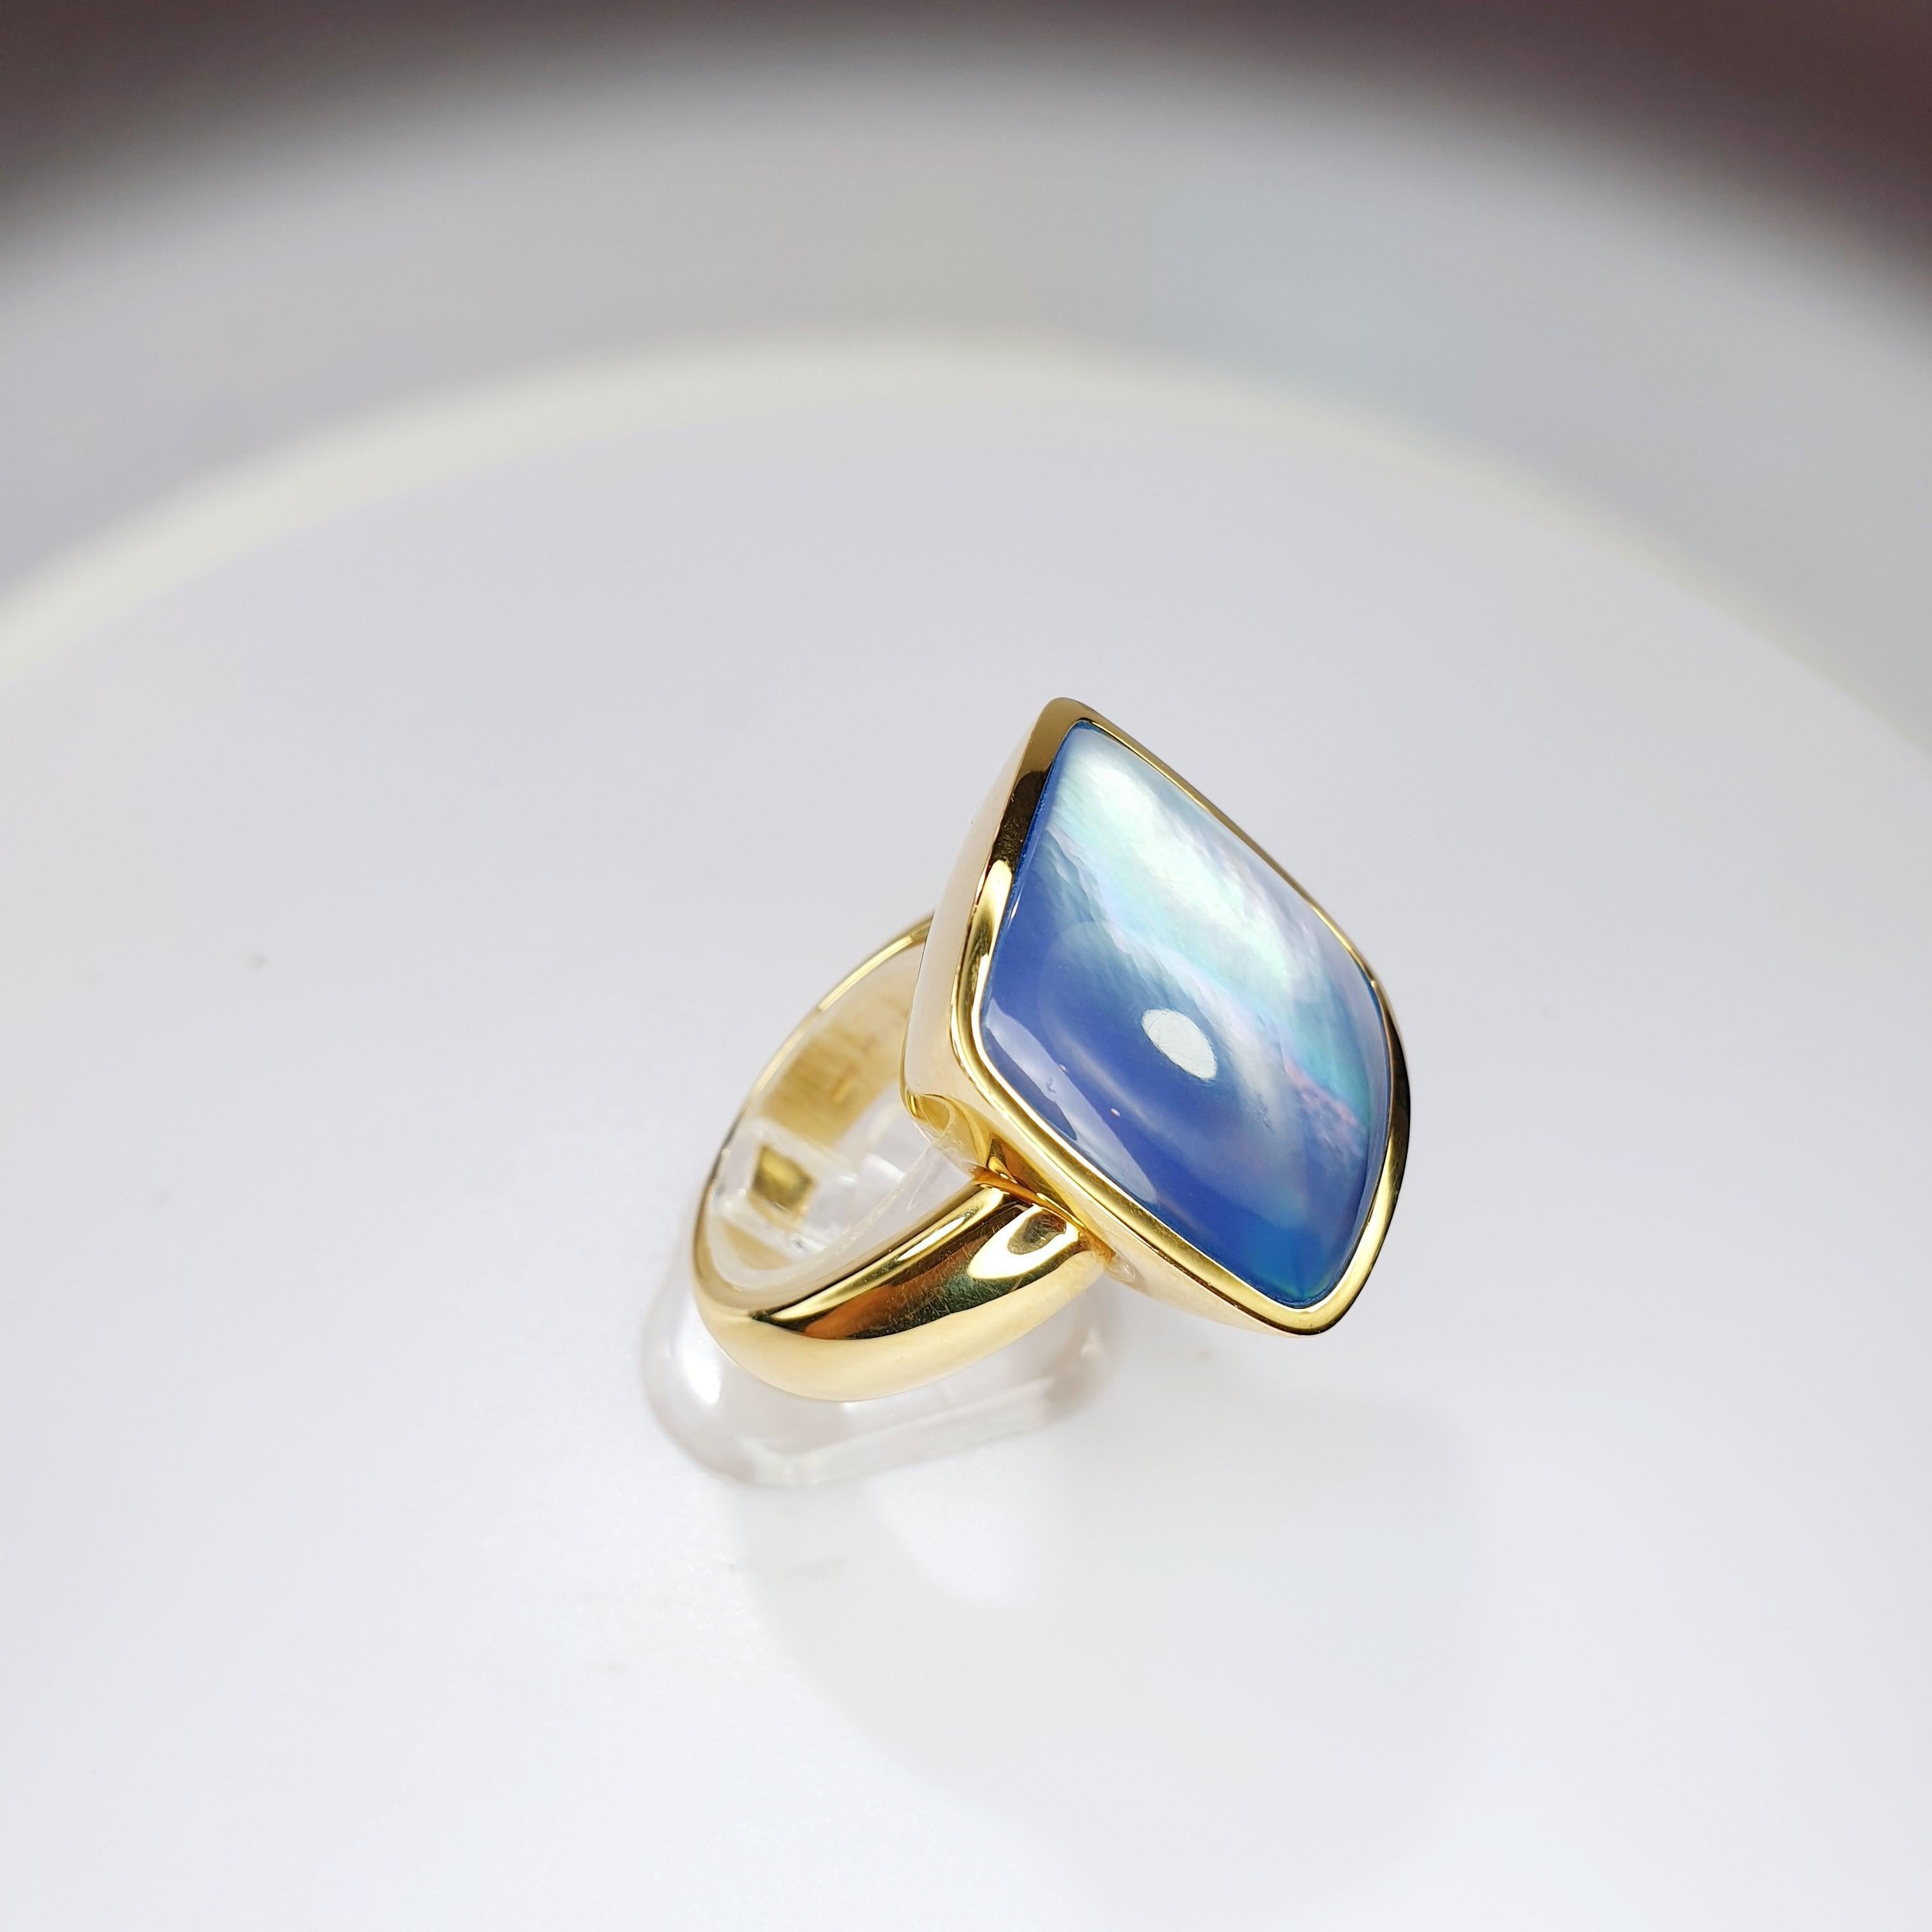 The rose gold and lapislazuli Cardinale ring conveys Vhernier’s passion for design and clean, understated shapes. This is a ring that flaunts contemporary simplicity. rose gold, lapis and rock crystal, creating one of Vhernier's famous Trasparenze.